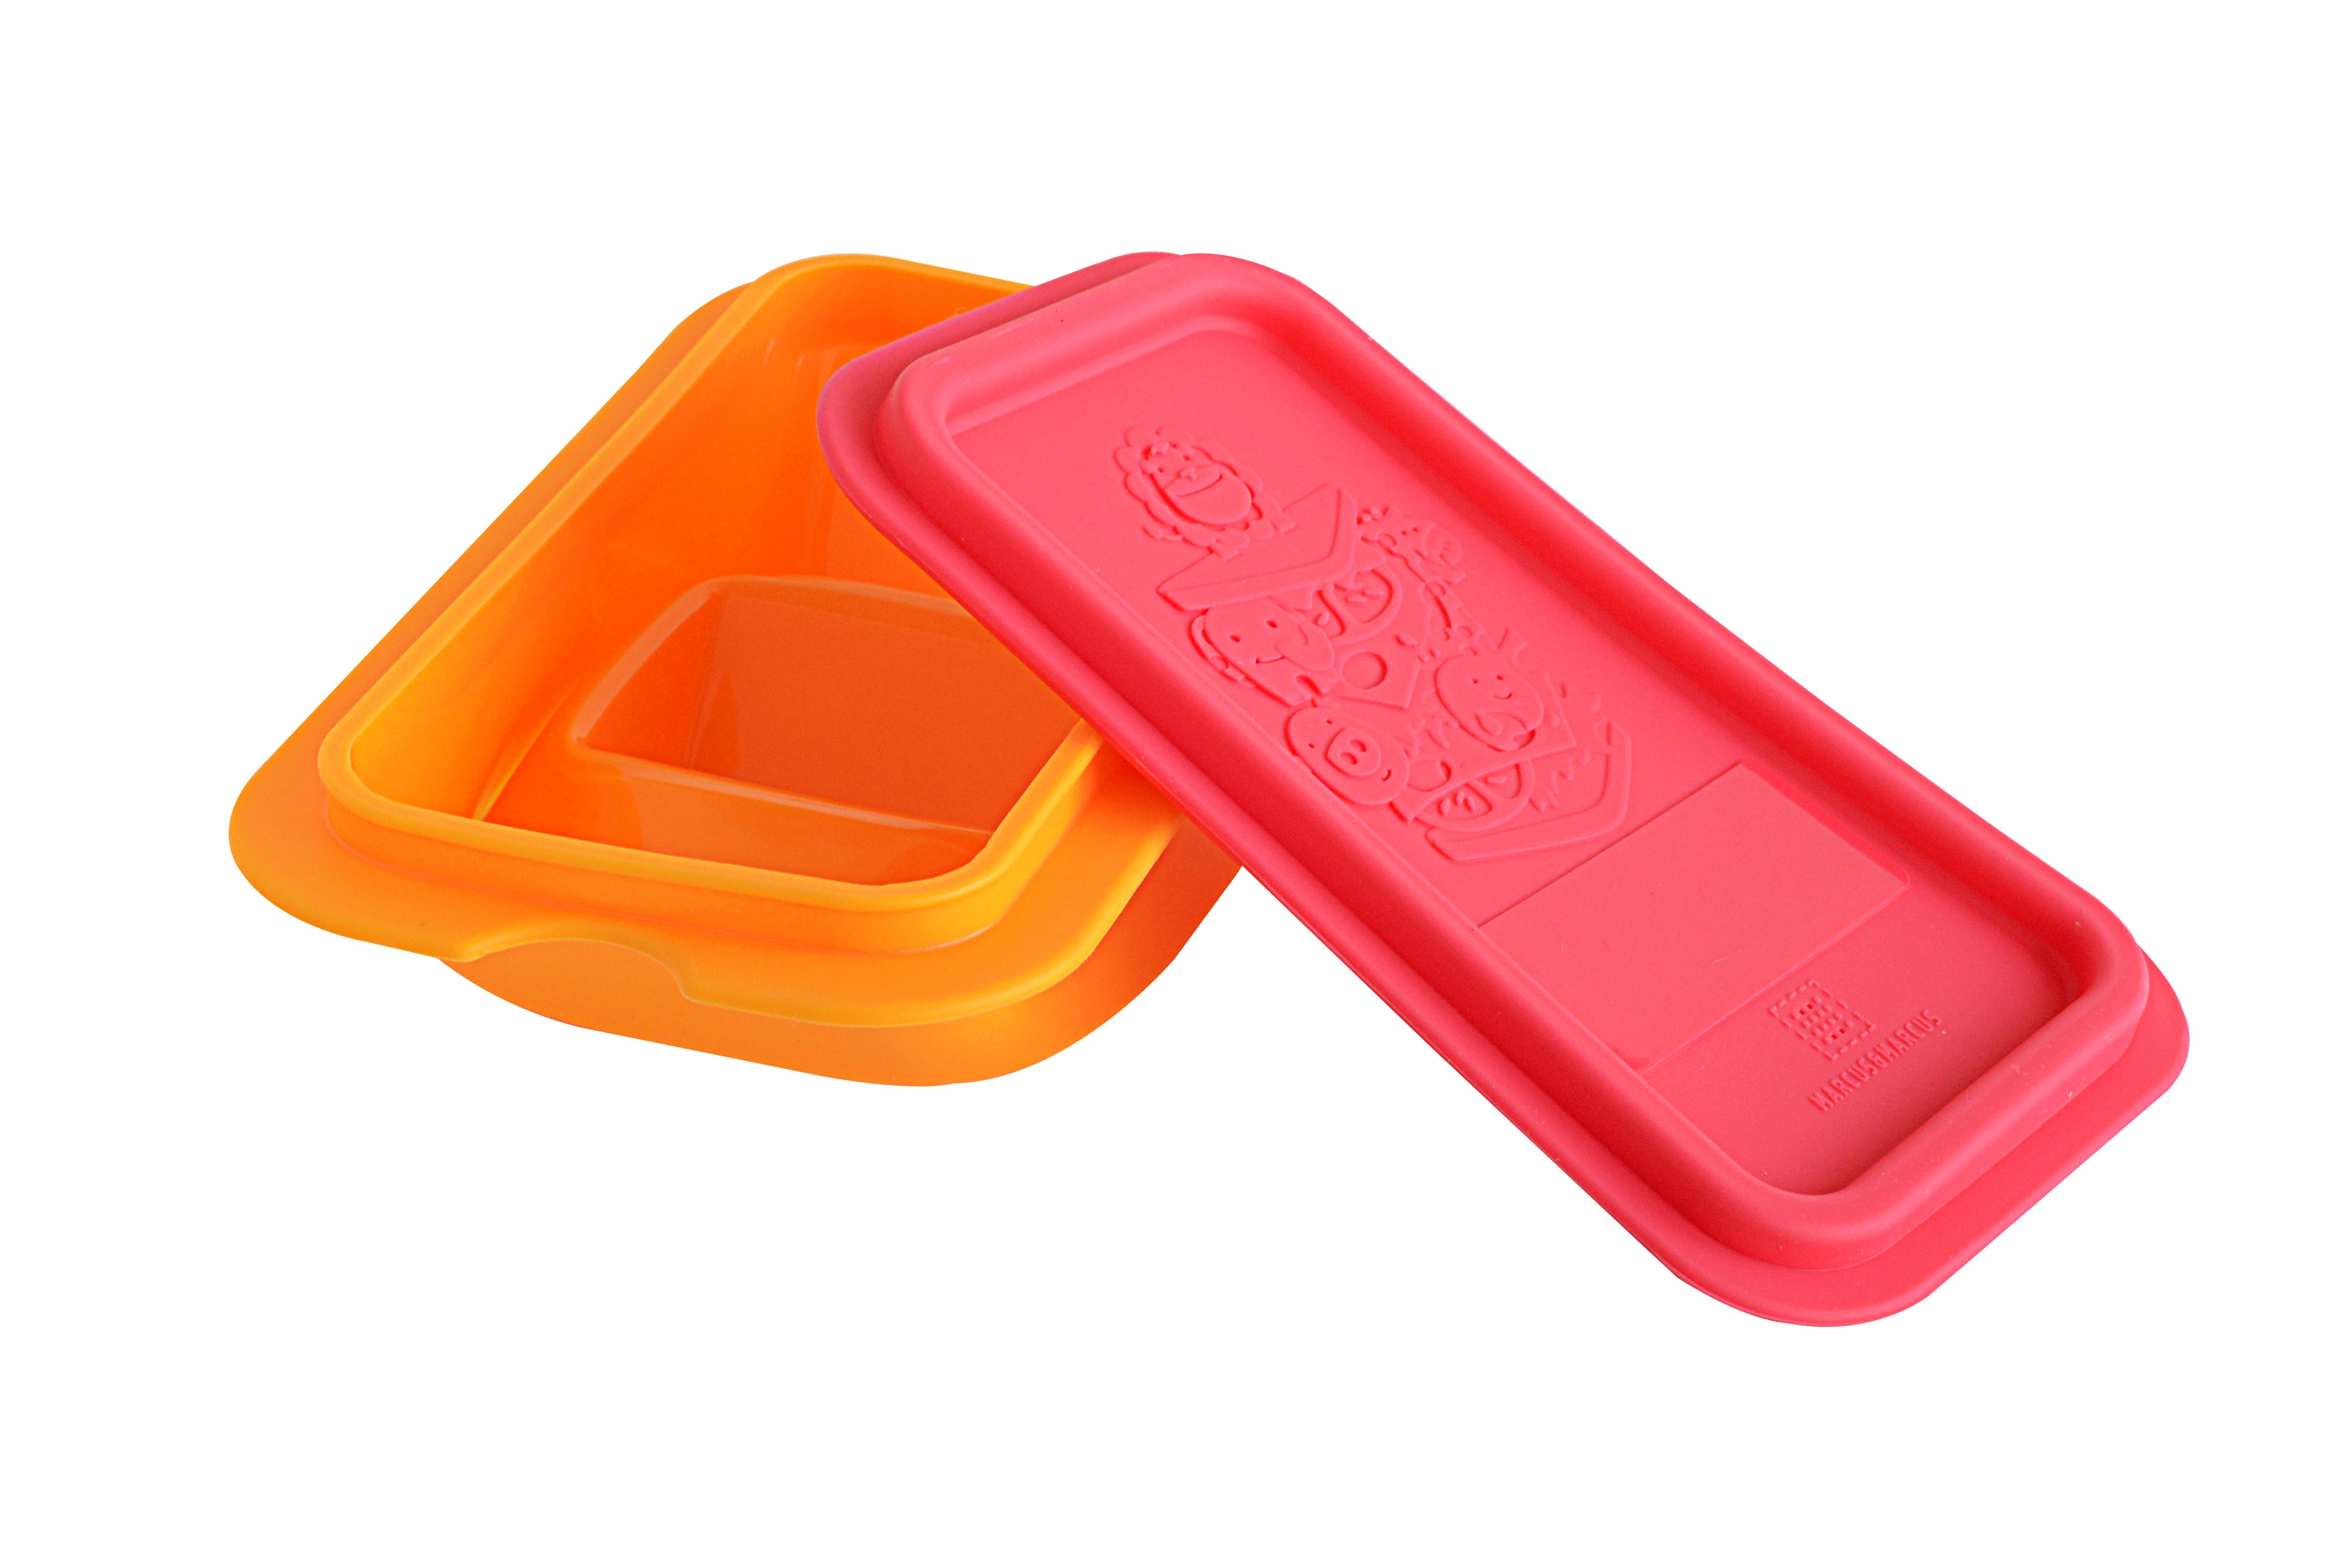  MdakeGo 3 Pack Sandwich Containers,3 Color Silicone